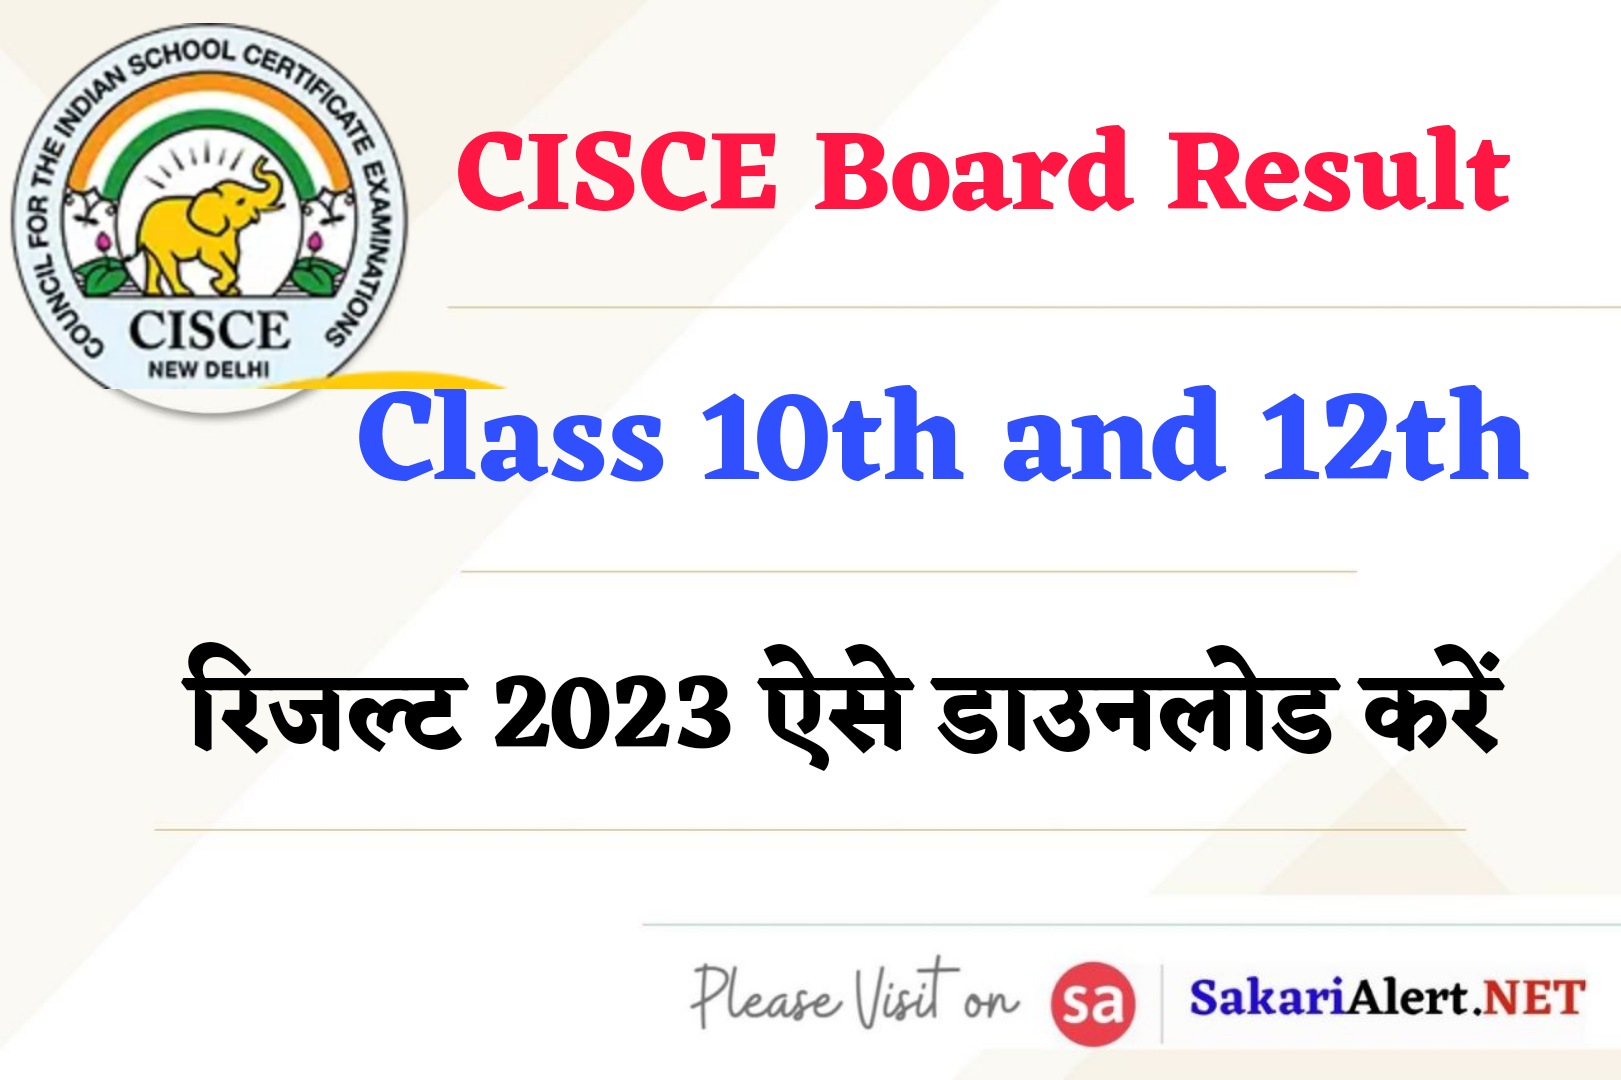 CISCE Board Class 10th and 12th Result 2023